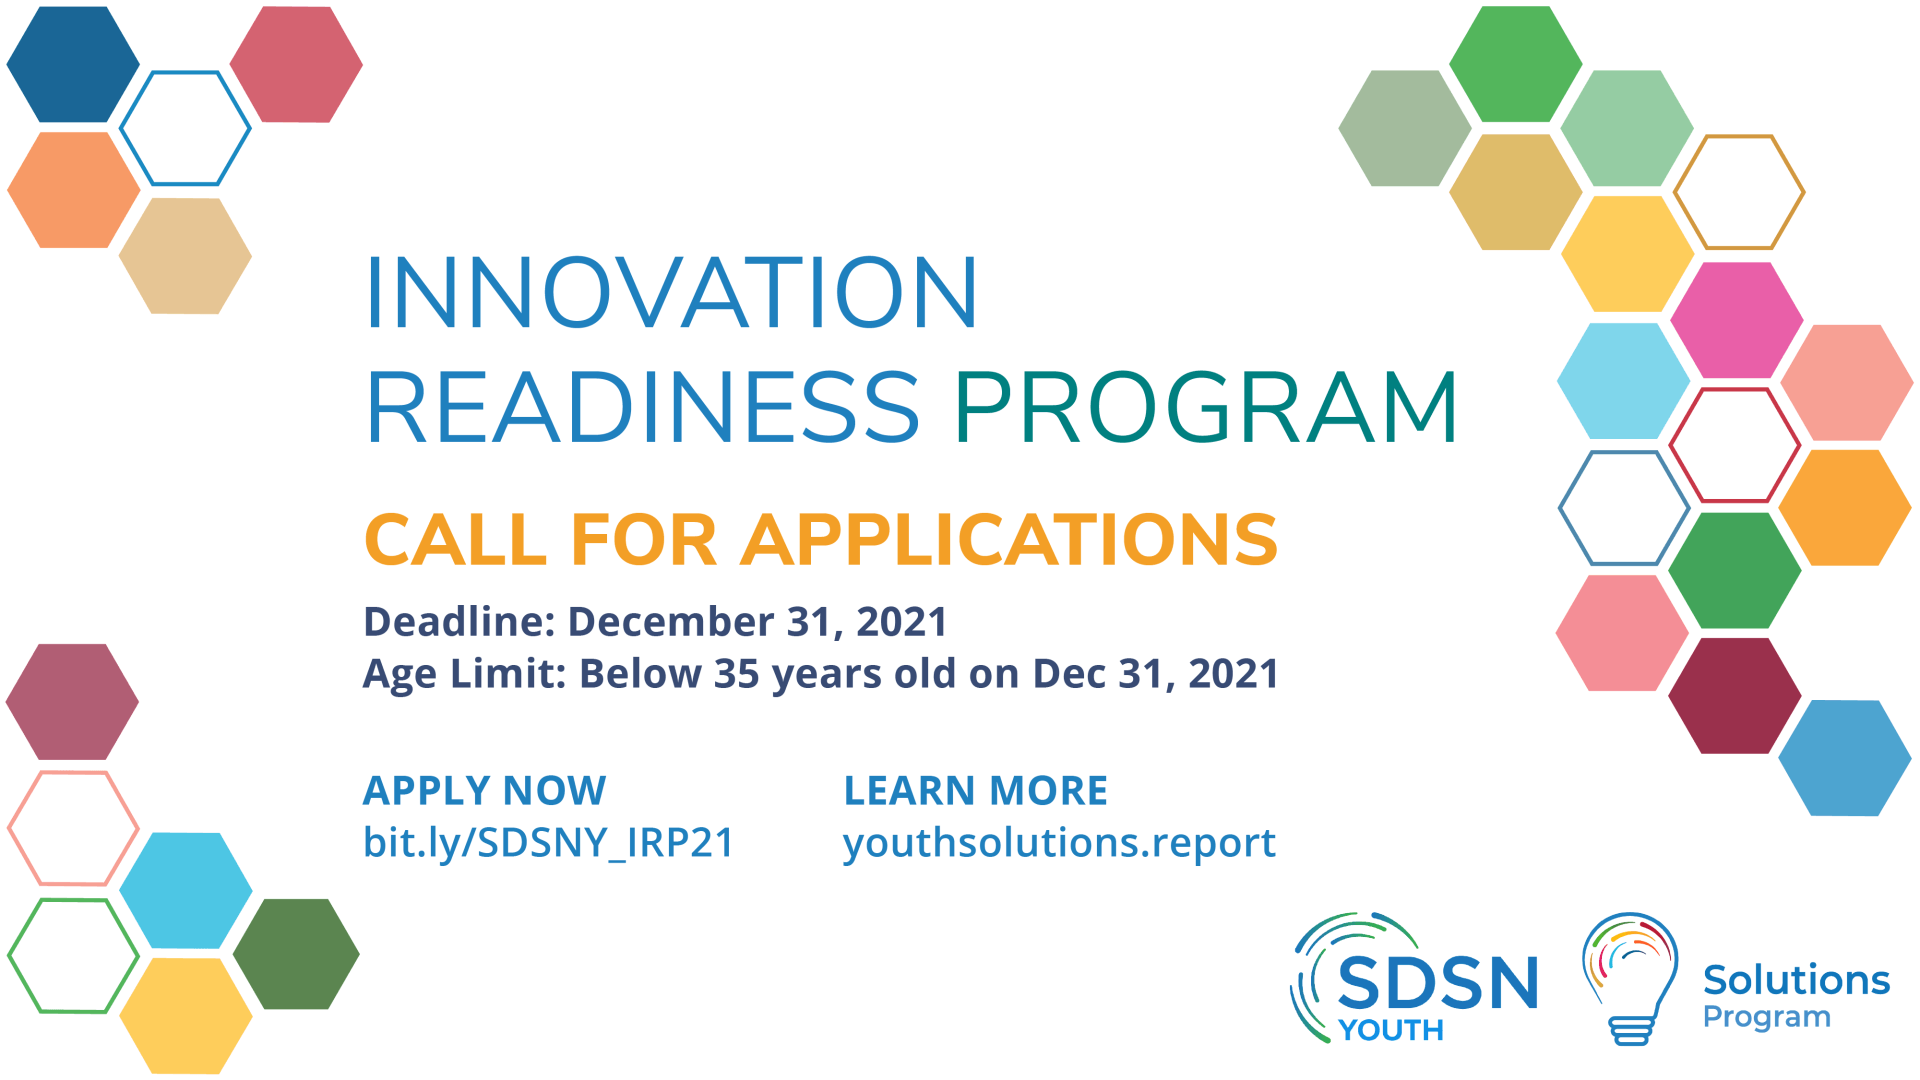 UN SDSN Innovation Readiness Program 2022 for Young Leaders